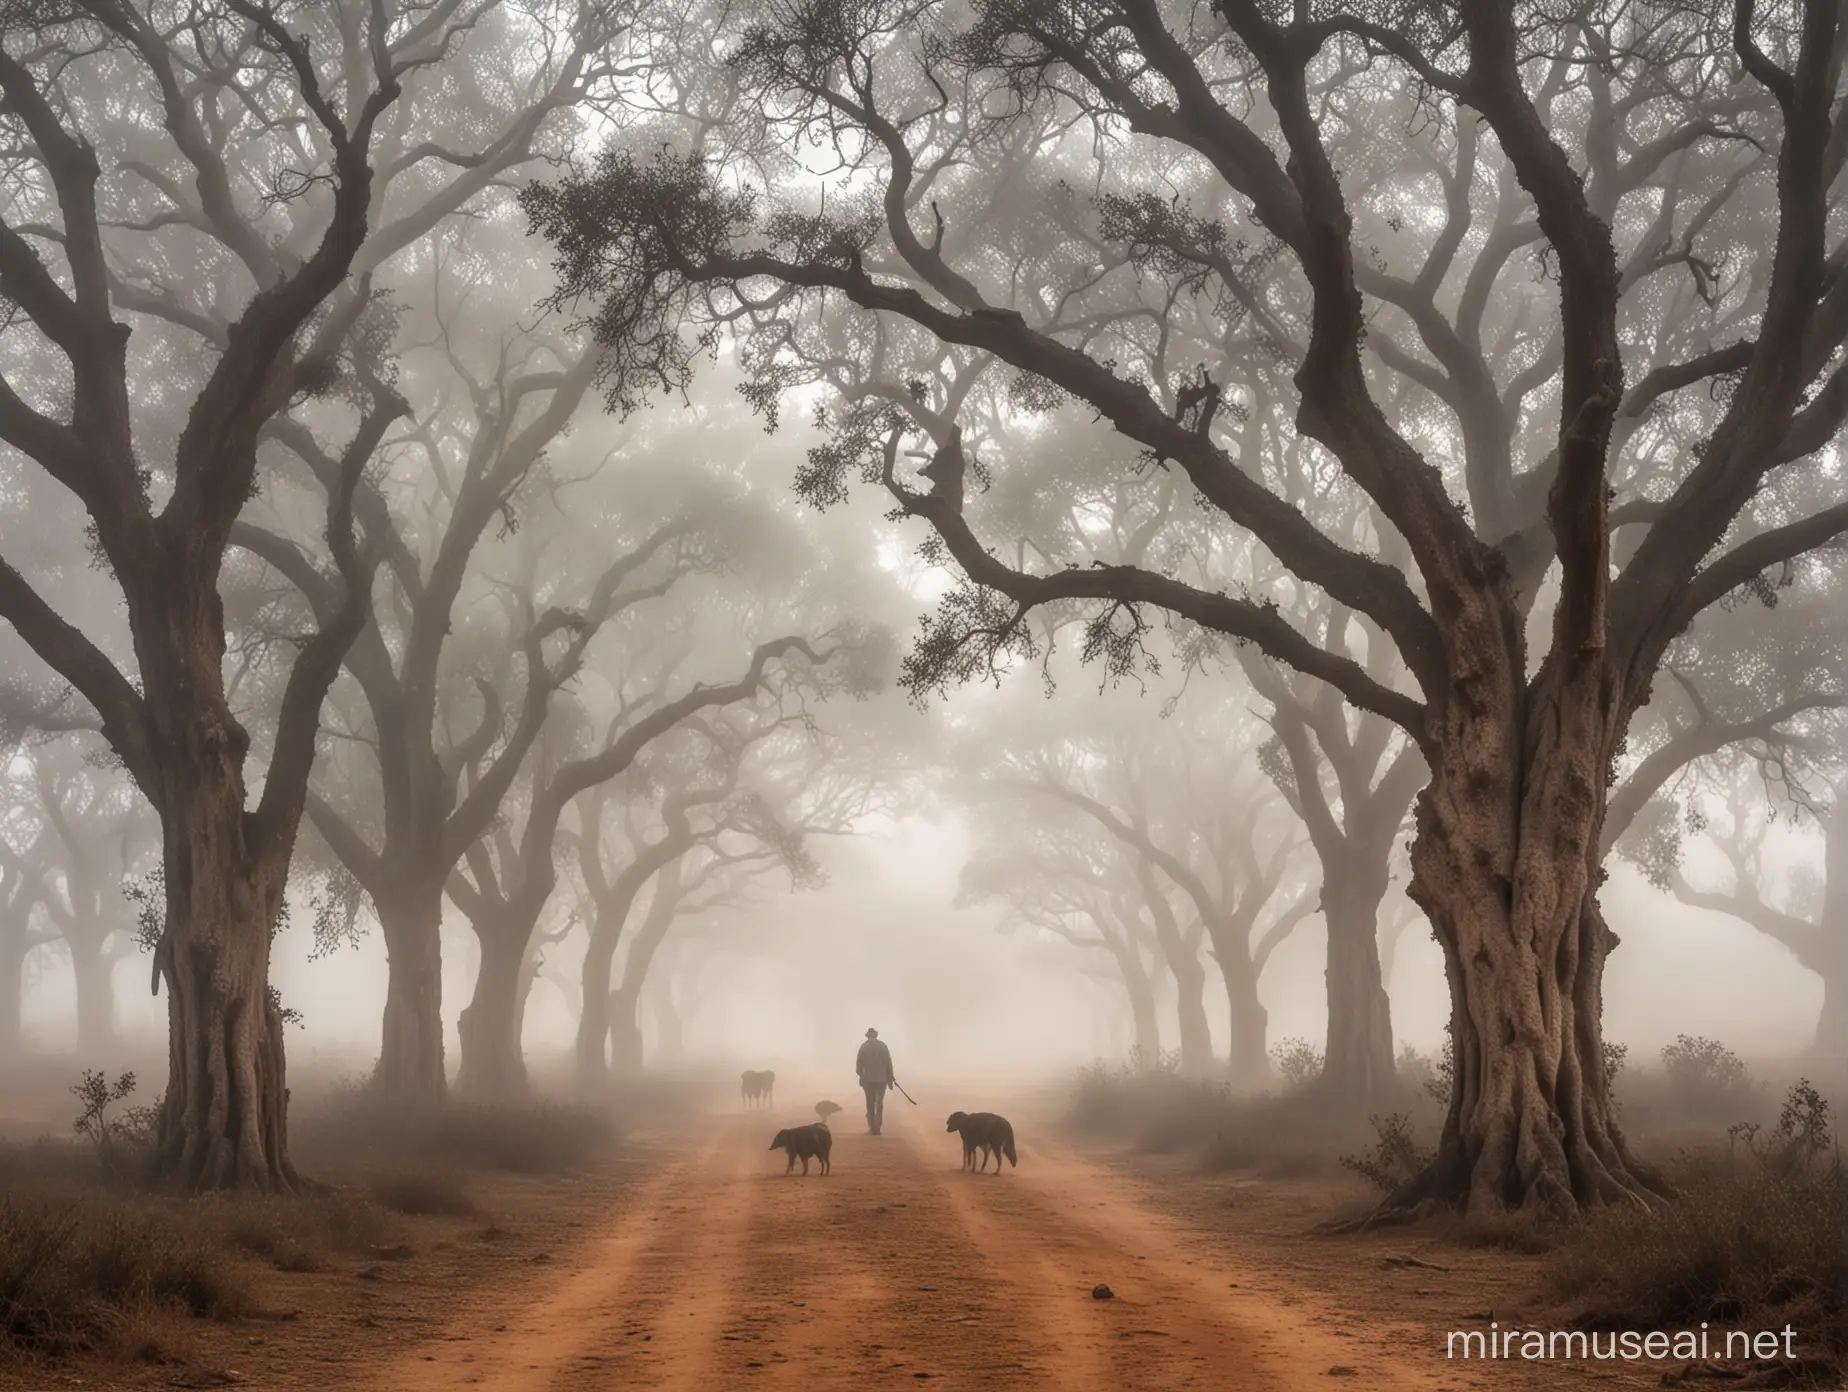 a landscape of cork oak trees in the heavy mist, a man and his dog in the mist, low light, striking shadows, HDR